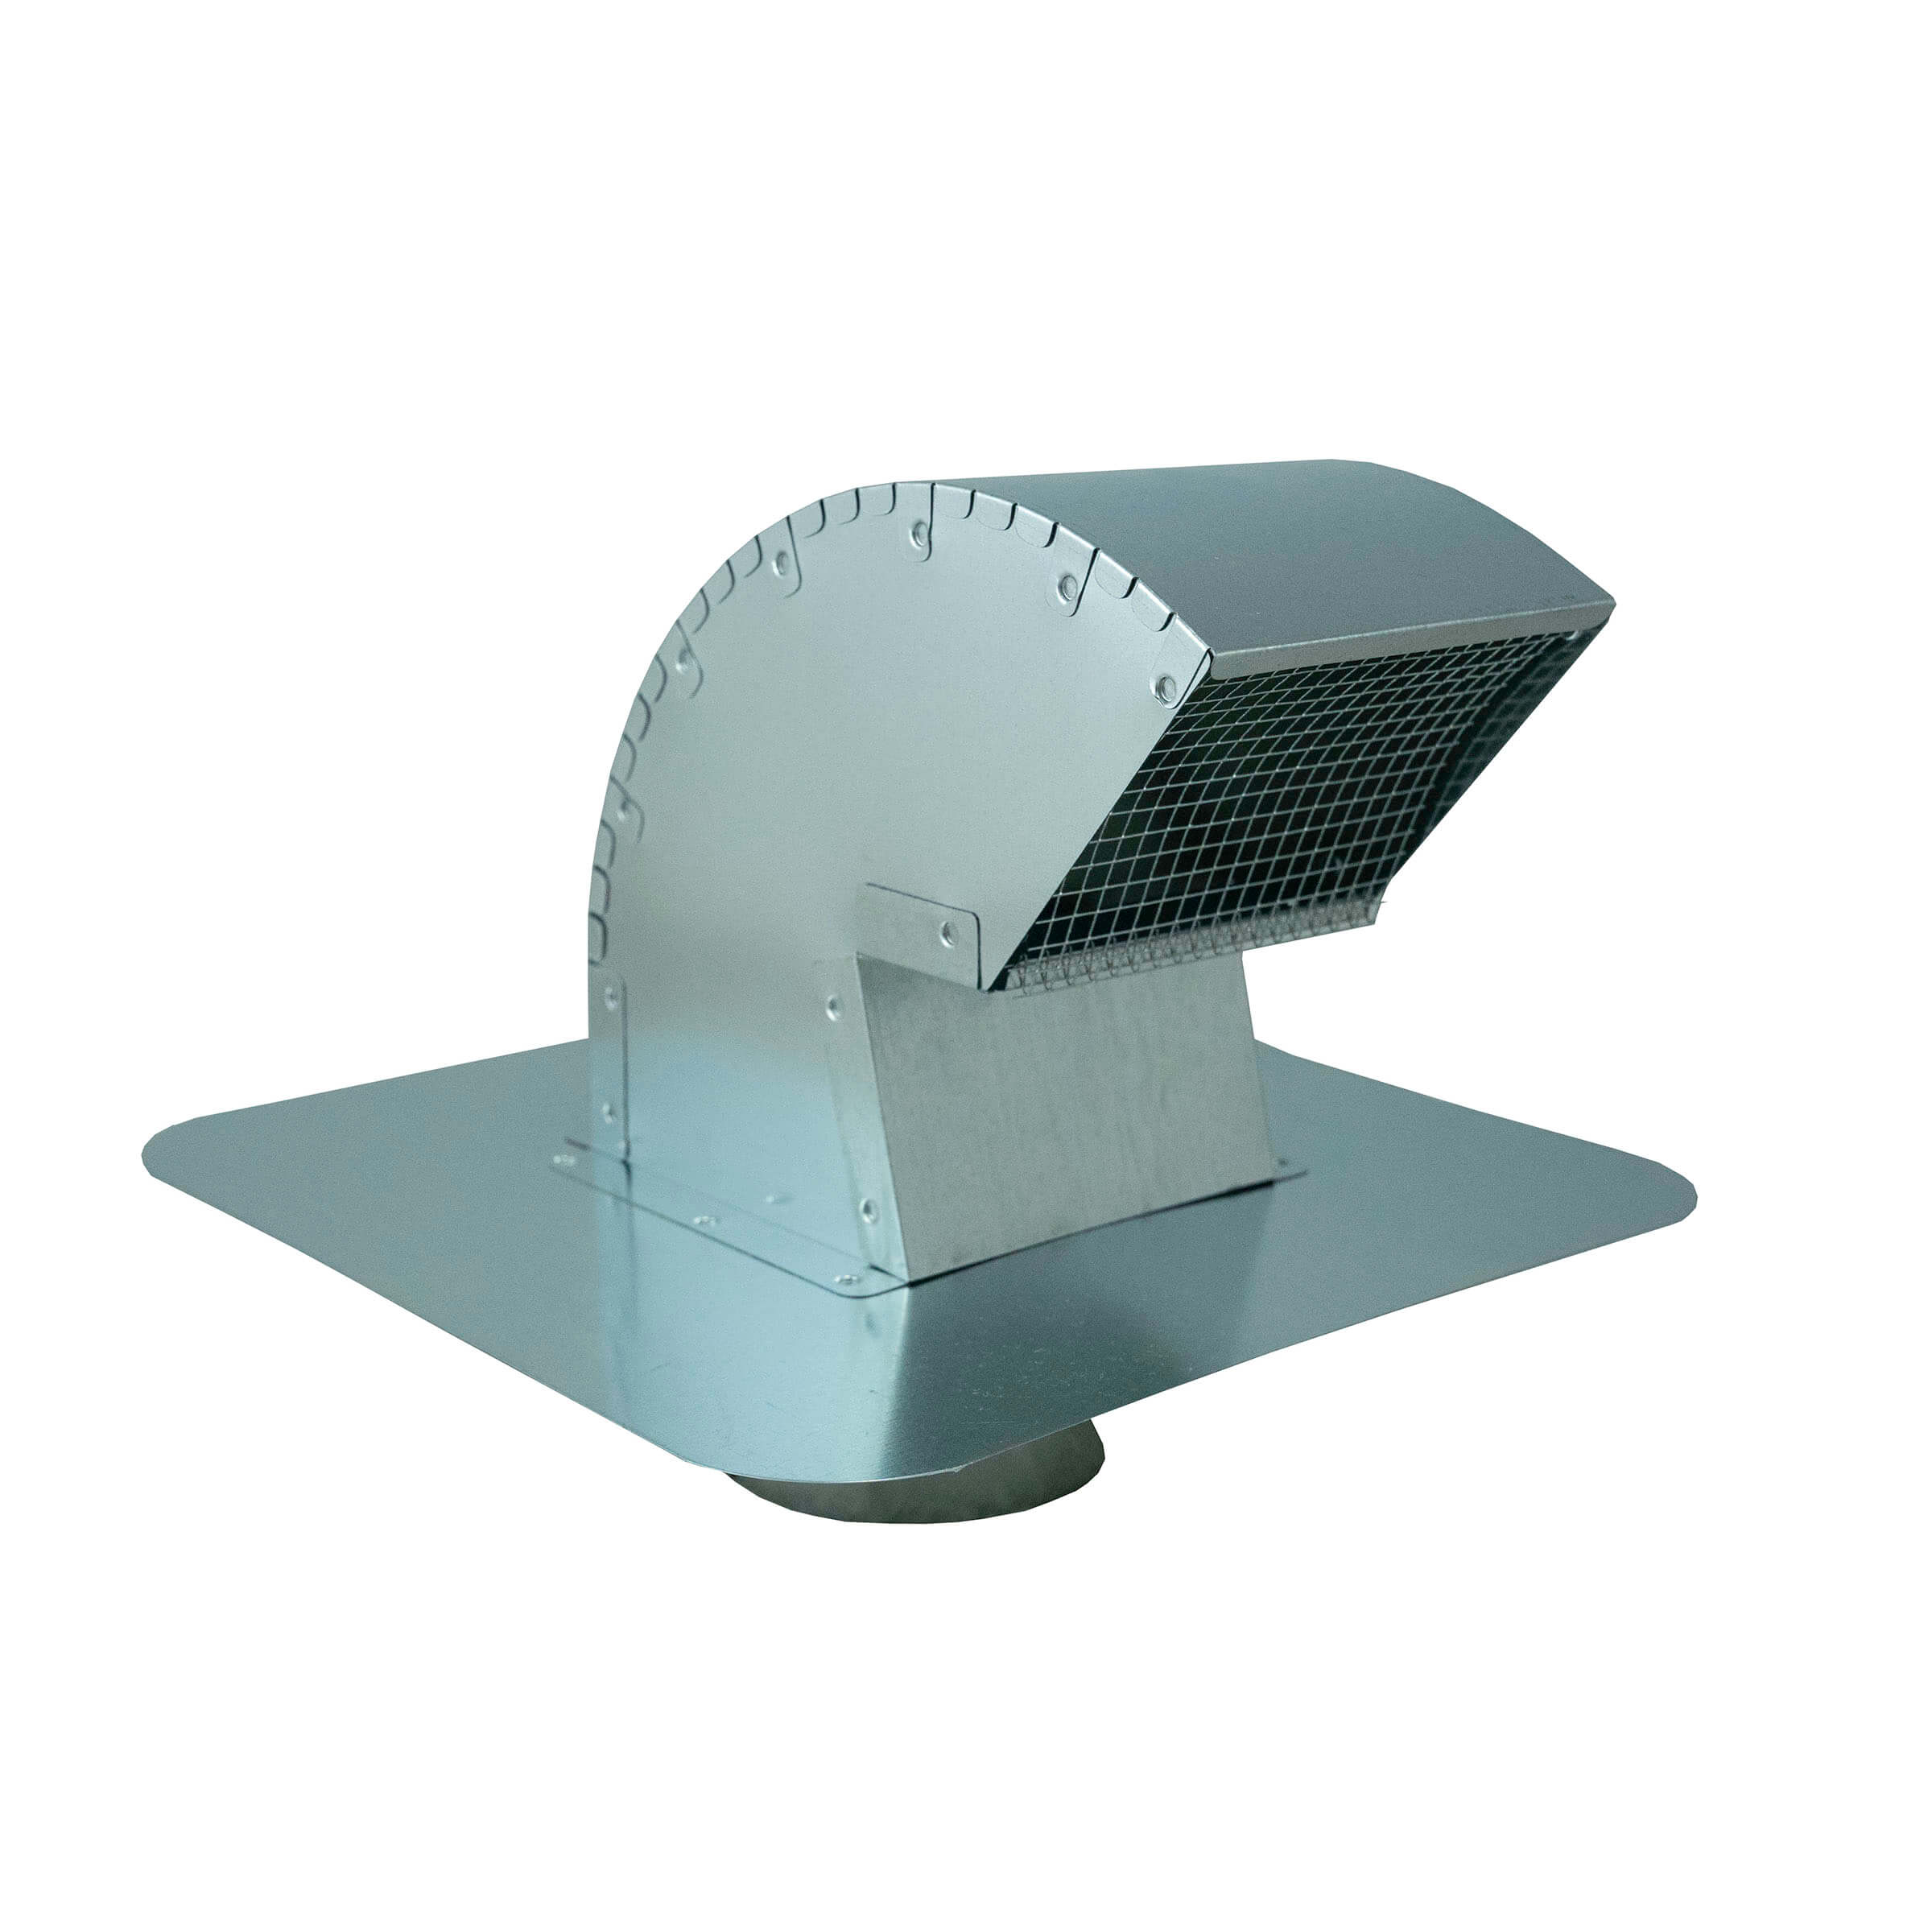 Goose Neck Exhaust Roof Vent with Extension Galvanized FAMCO